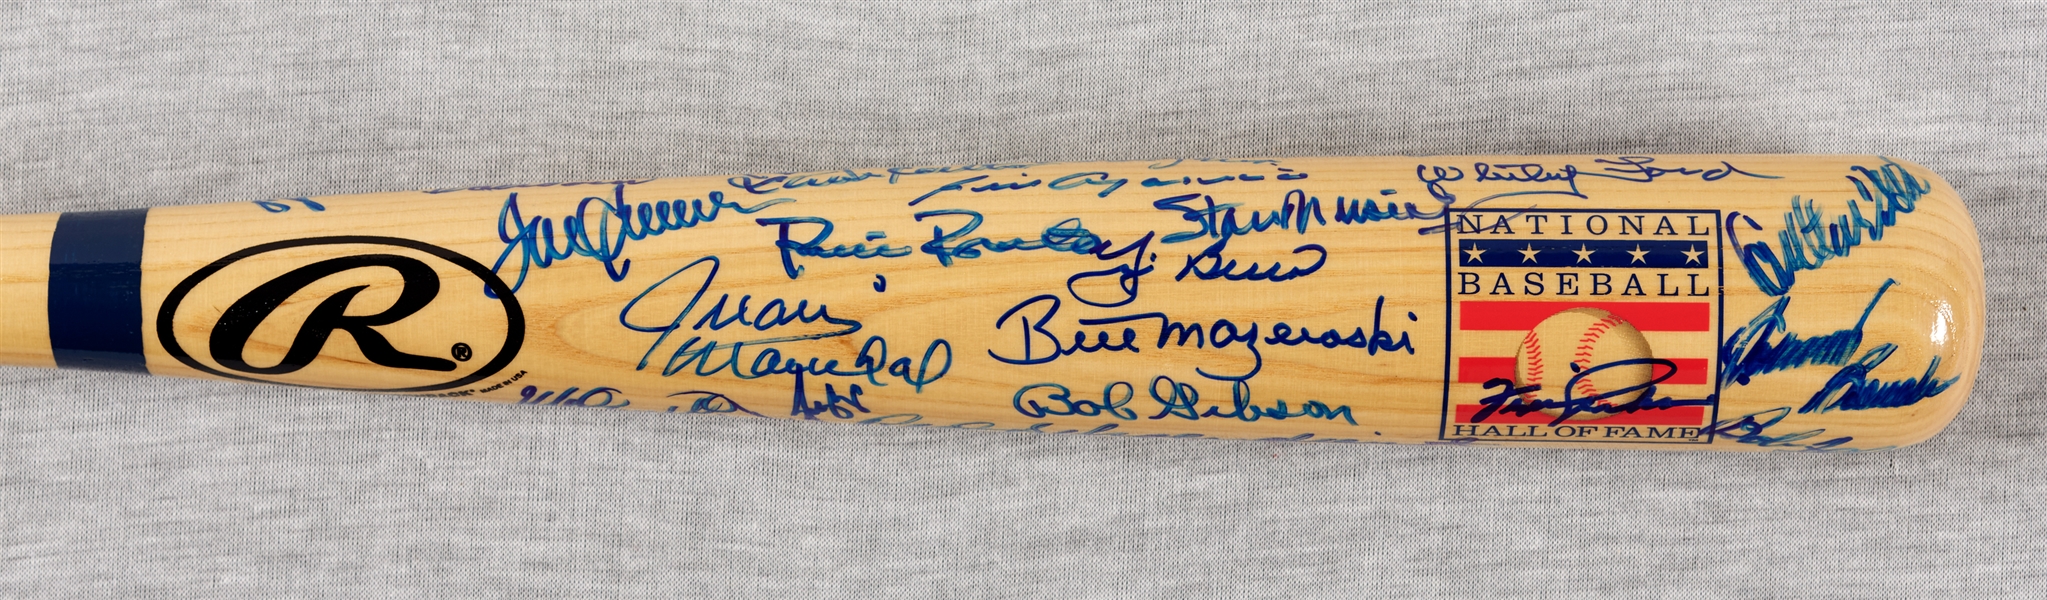 HOFer Multi-Signed Rawlings Bat with Puckett, Koufax, Musial (42) (BAS)